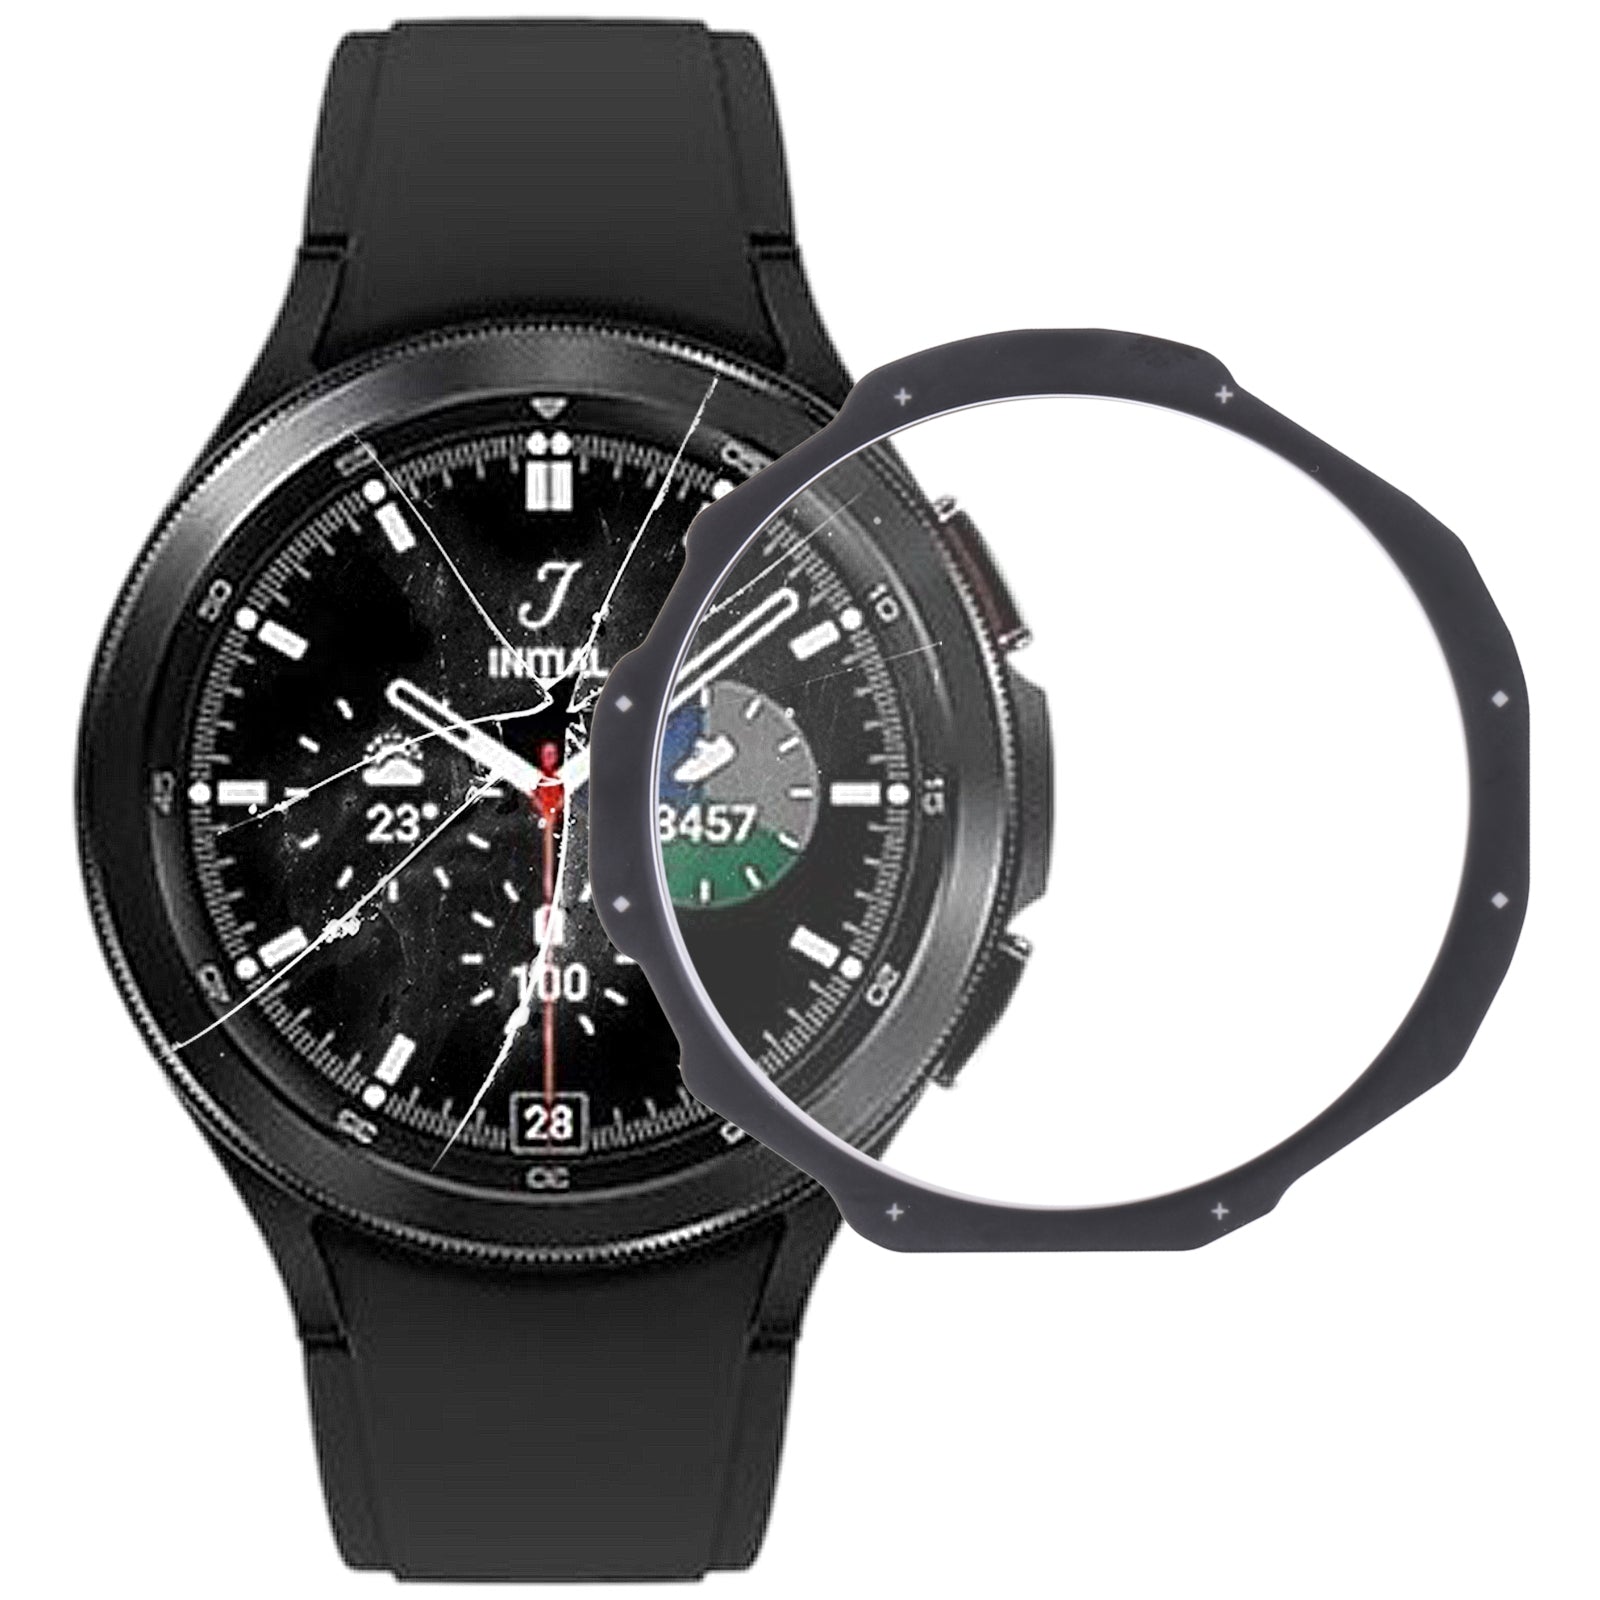 Outer Glass Front Screen Samsung Galaxy Watch 4 Classic 46mm R890 Black